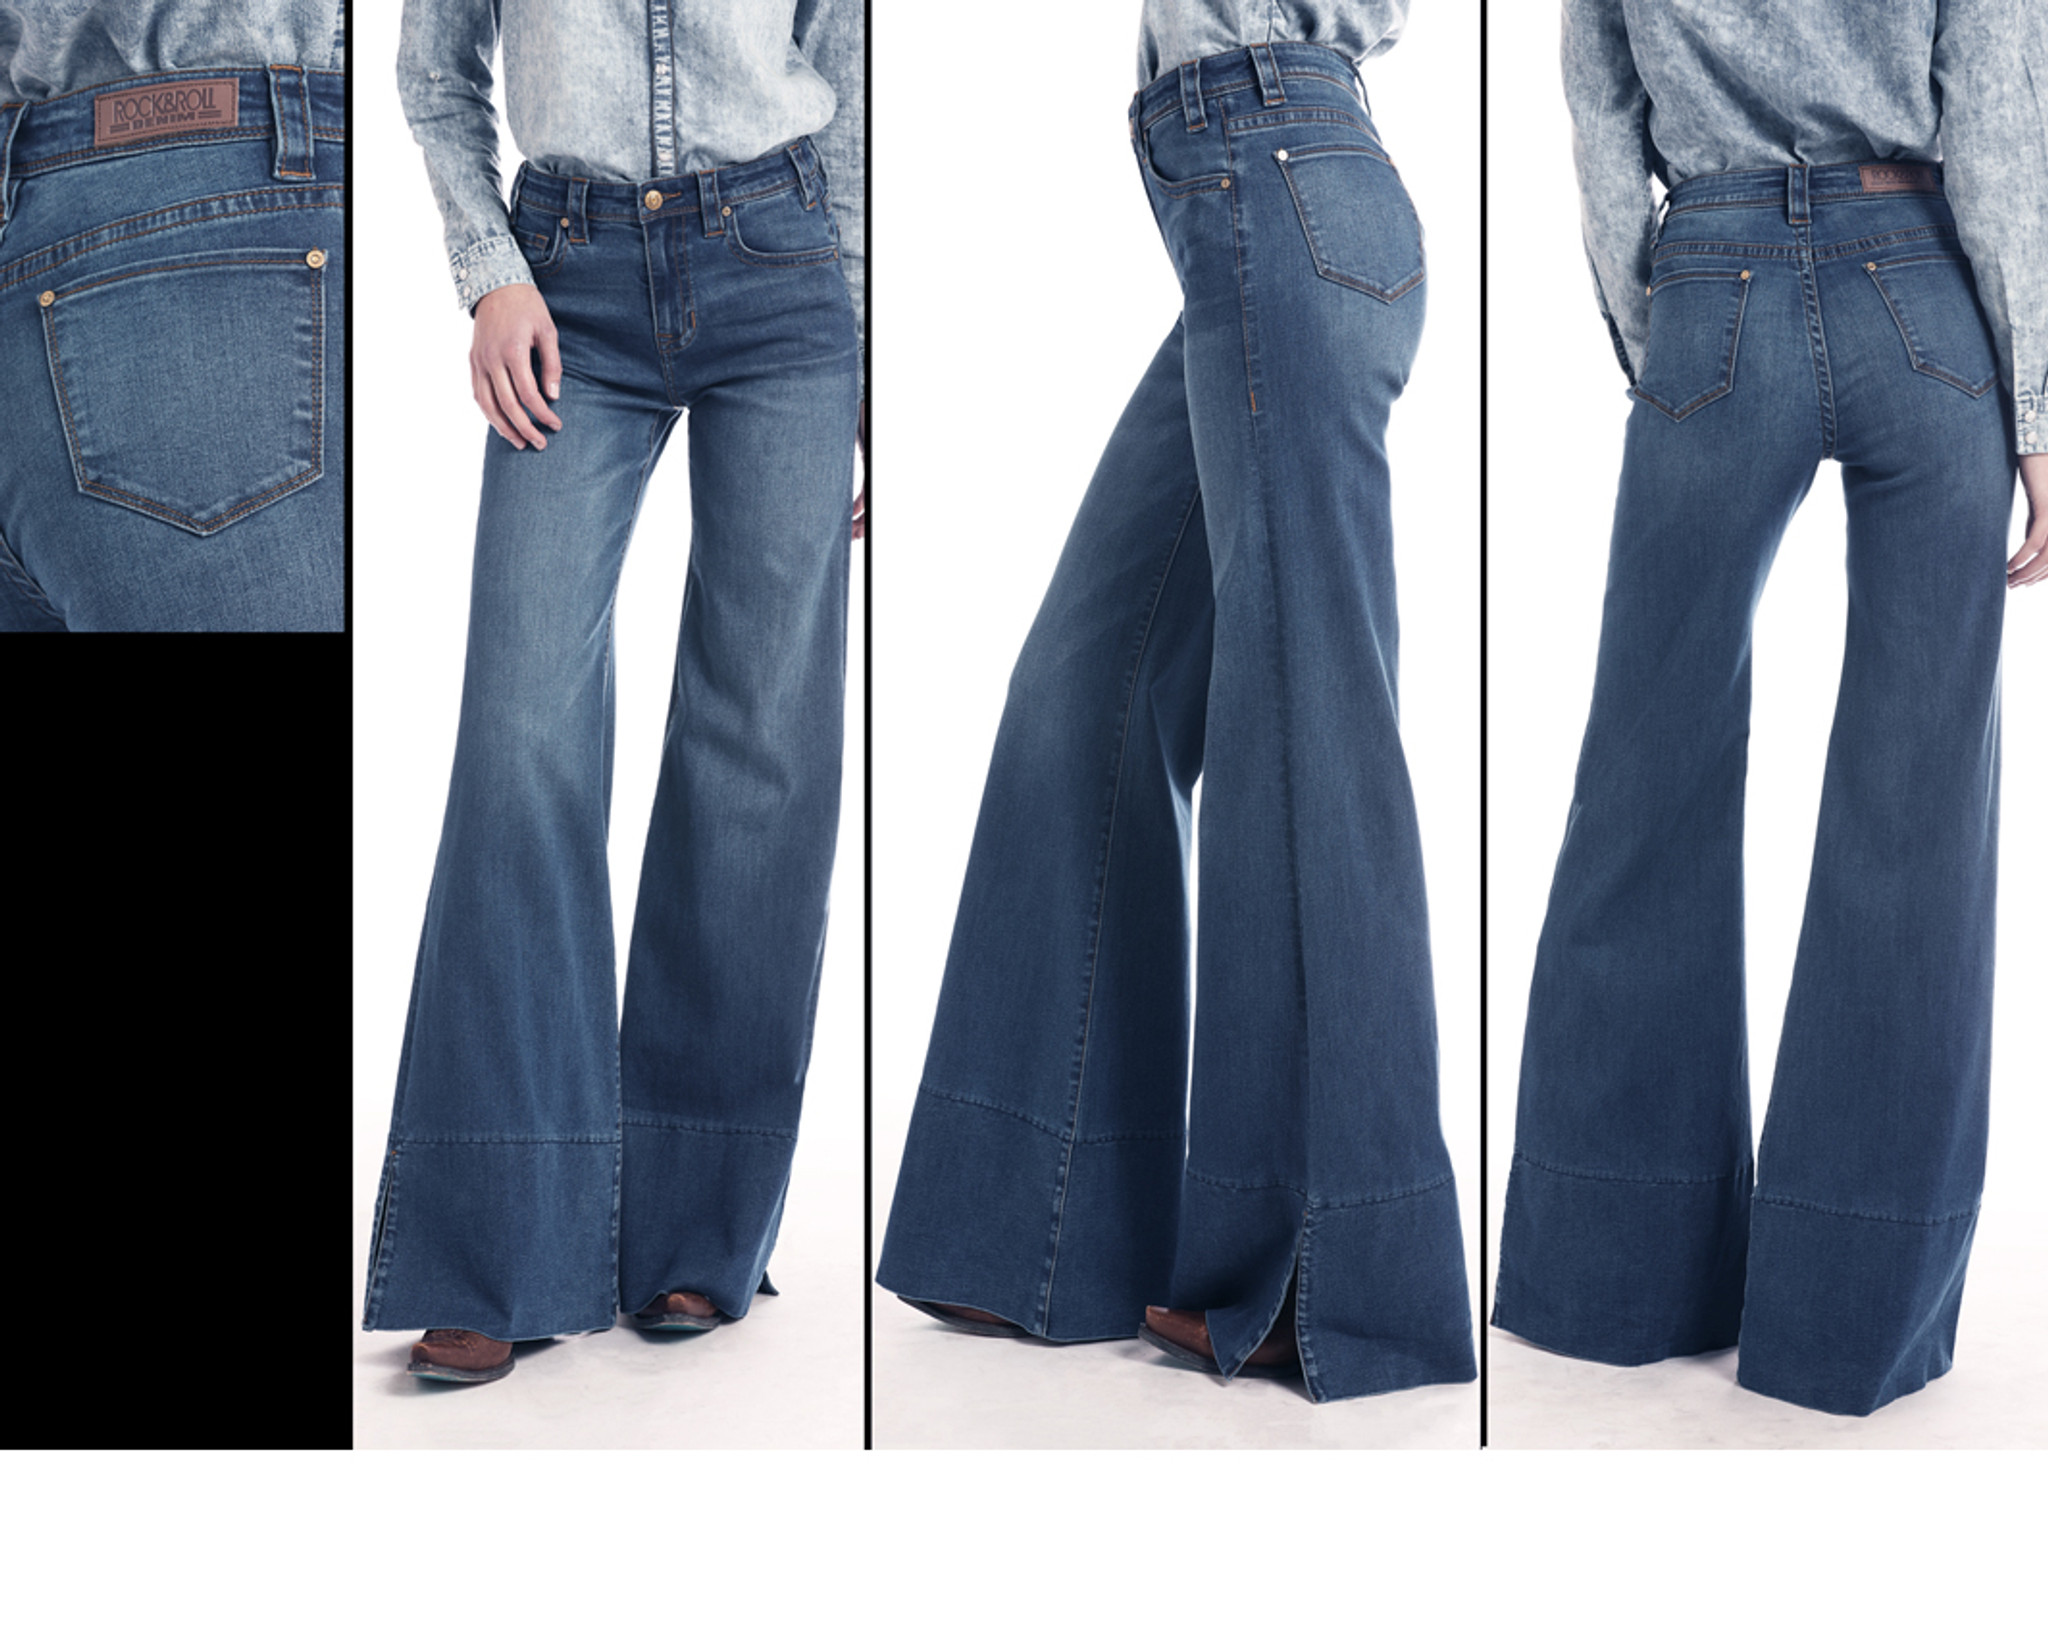 rock and roll jeans womens